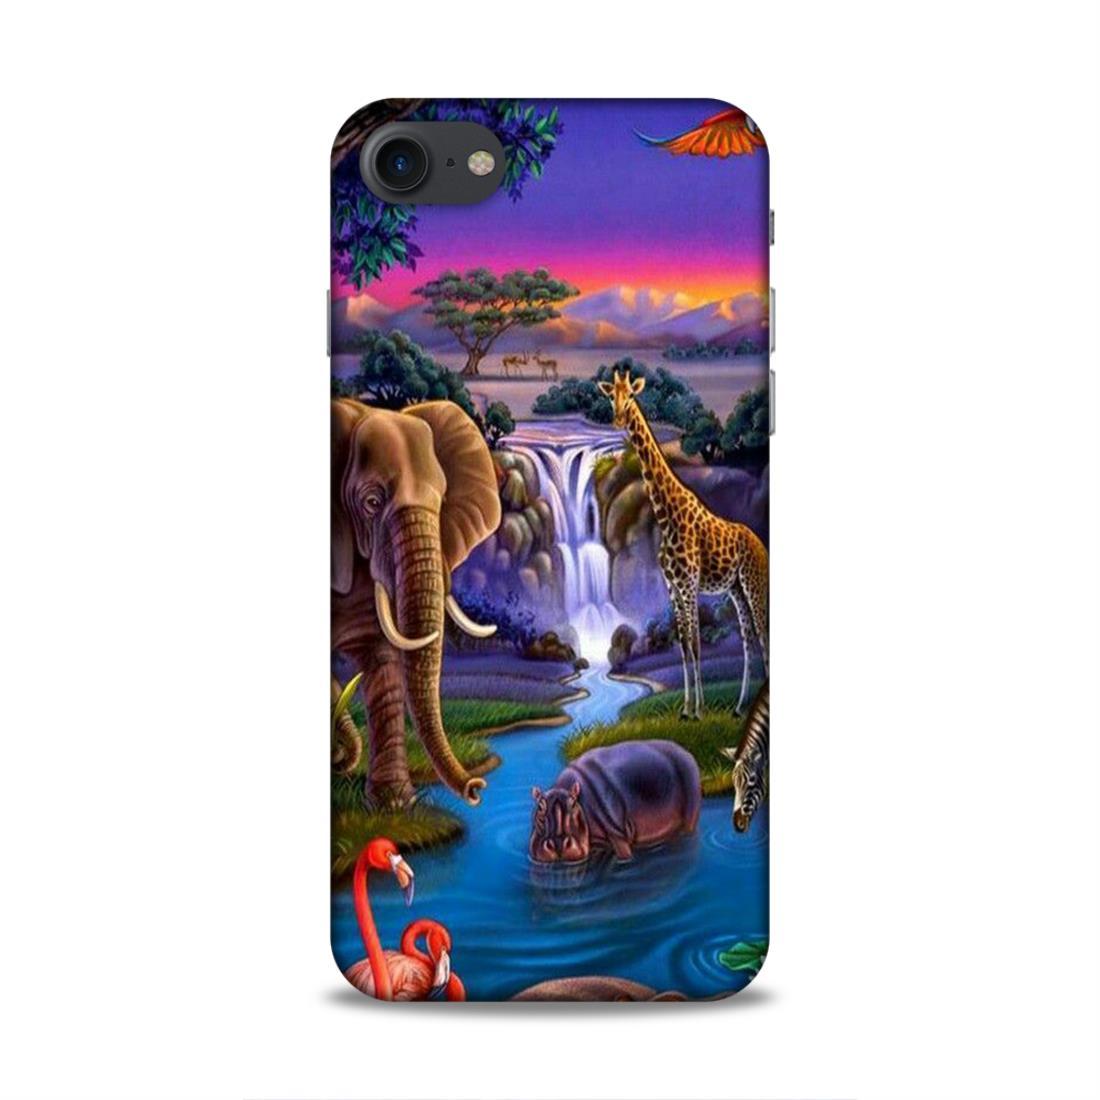 Jungle Art iPhone 7 Mobile Cover